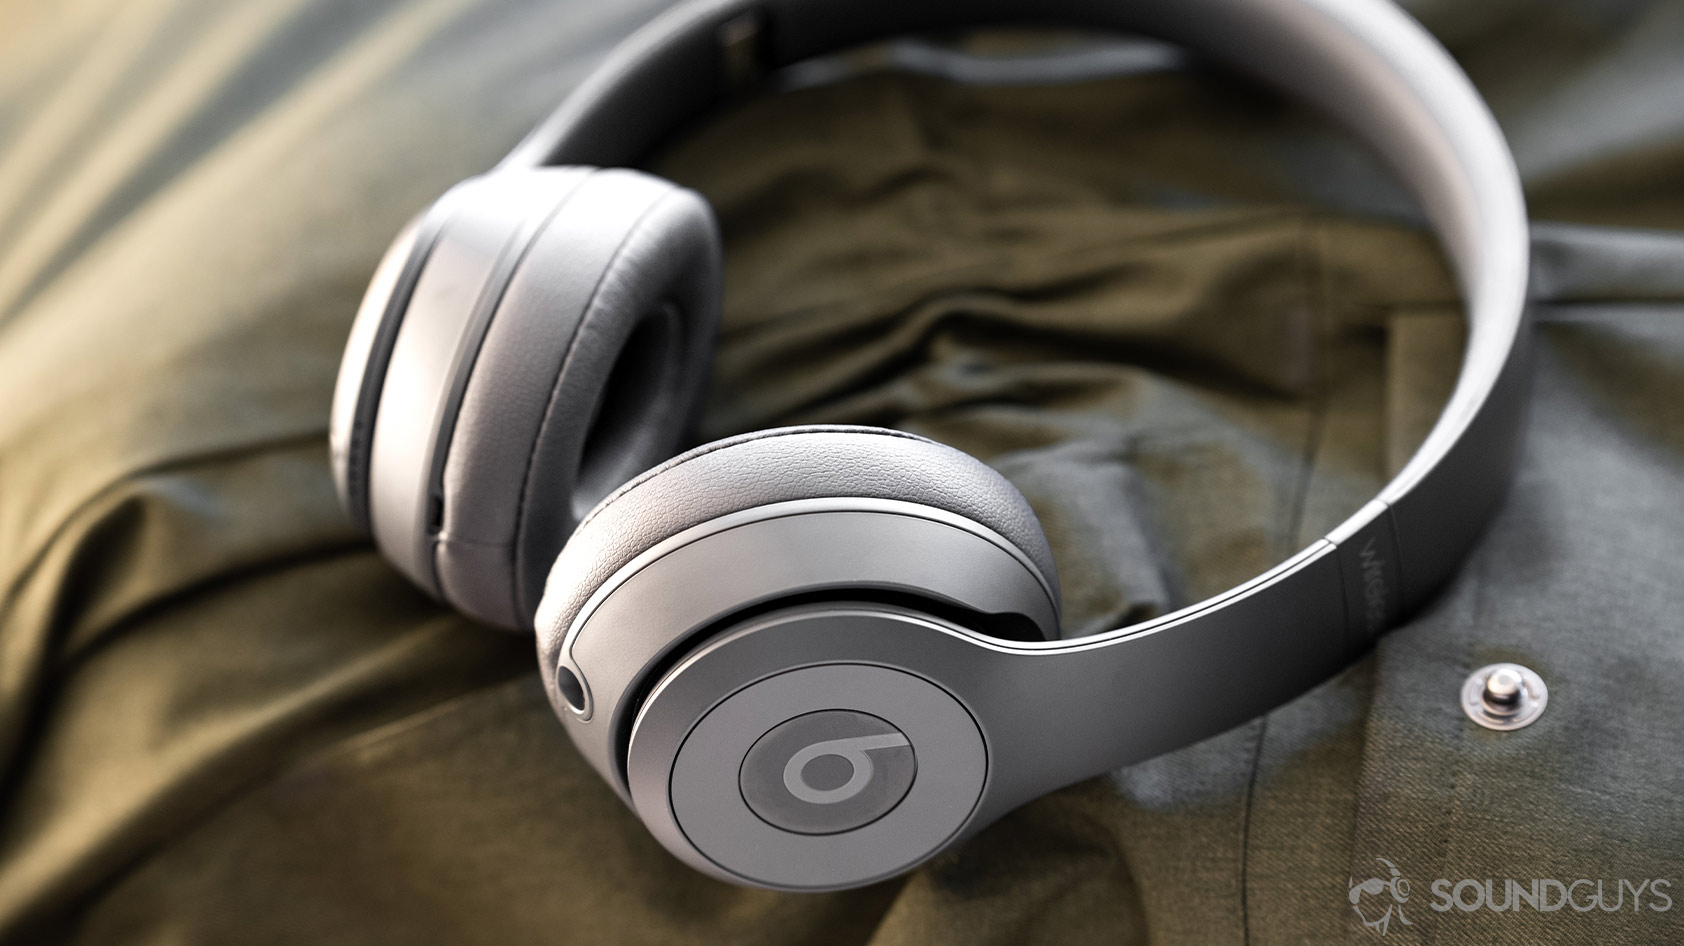 The Beats Solo3 Wireless in grey on a green cloth surface.